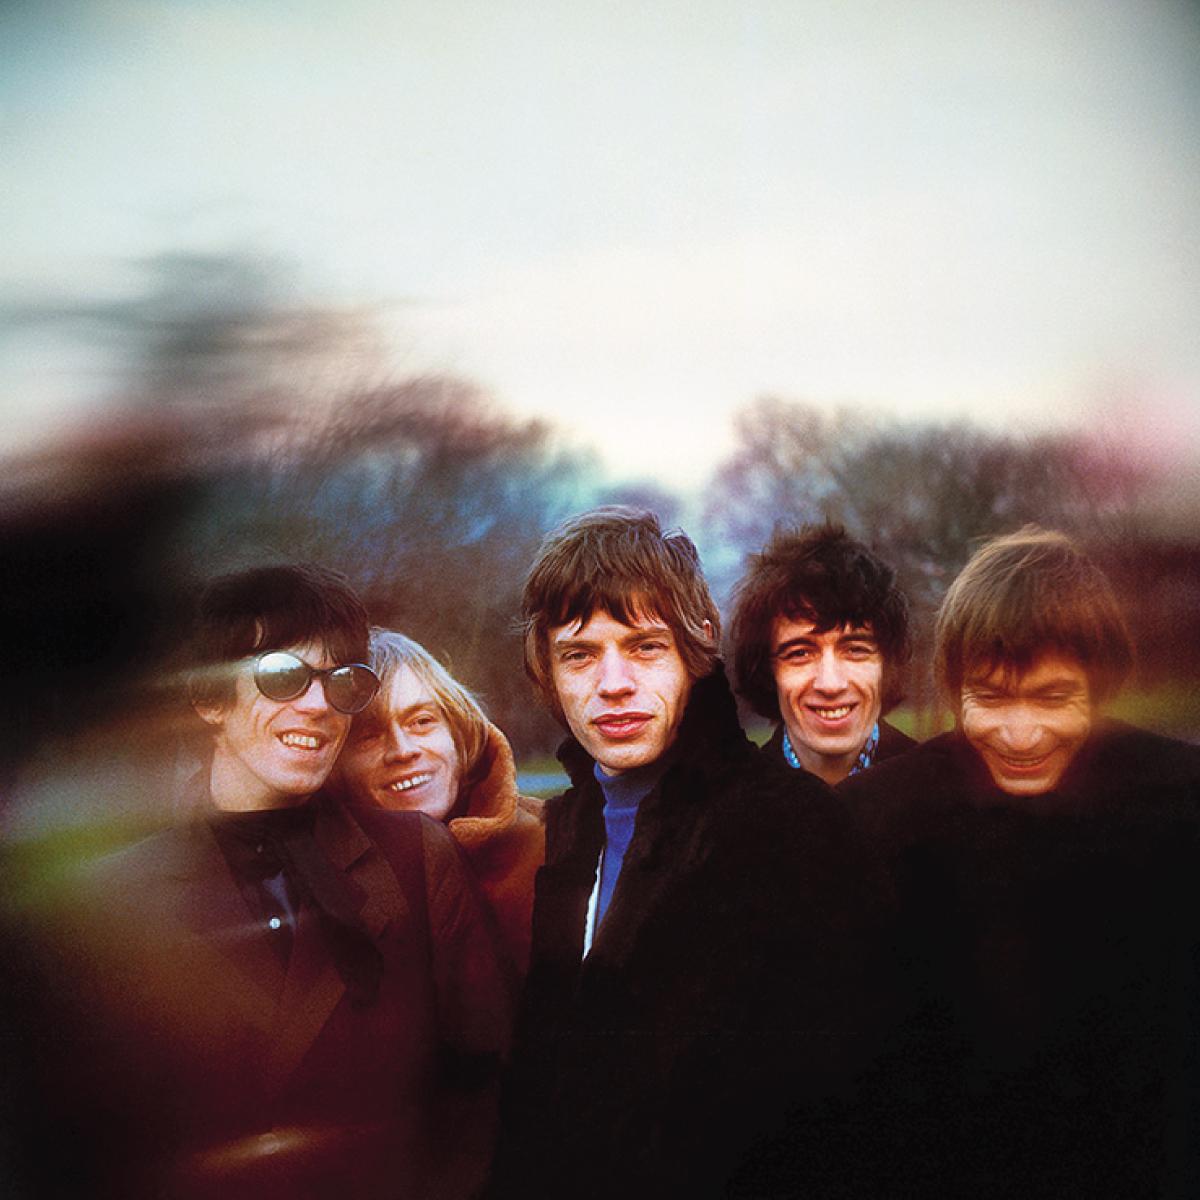 The Rolling Stones "Between The Buttons" par Gered Mankowitz